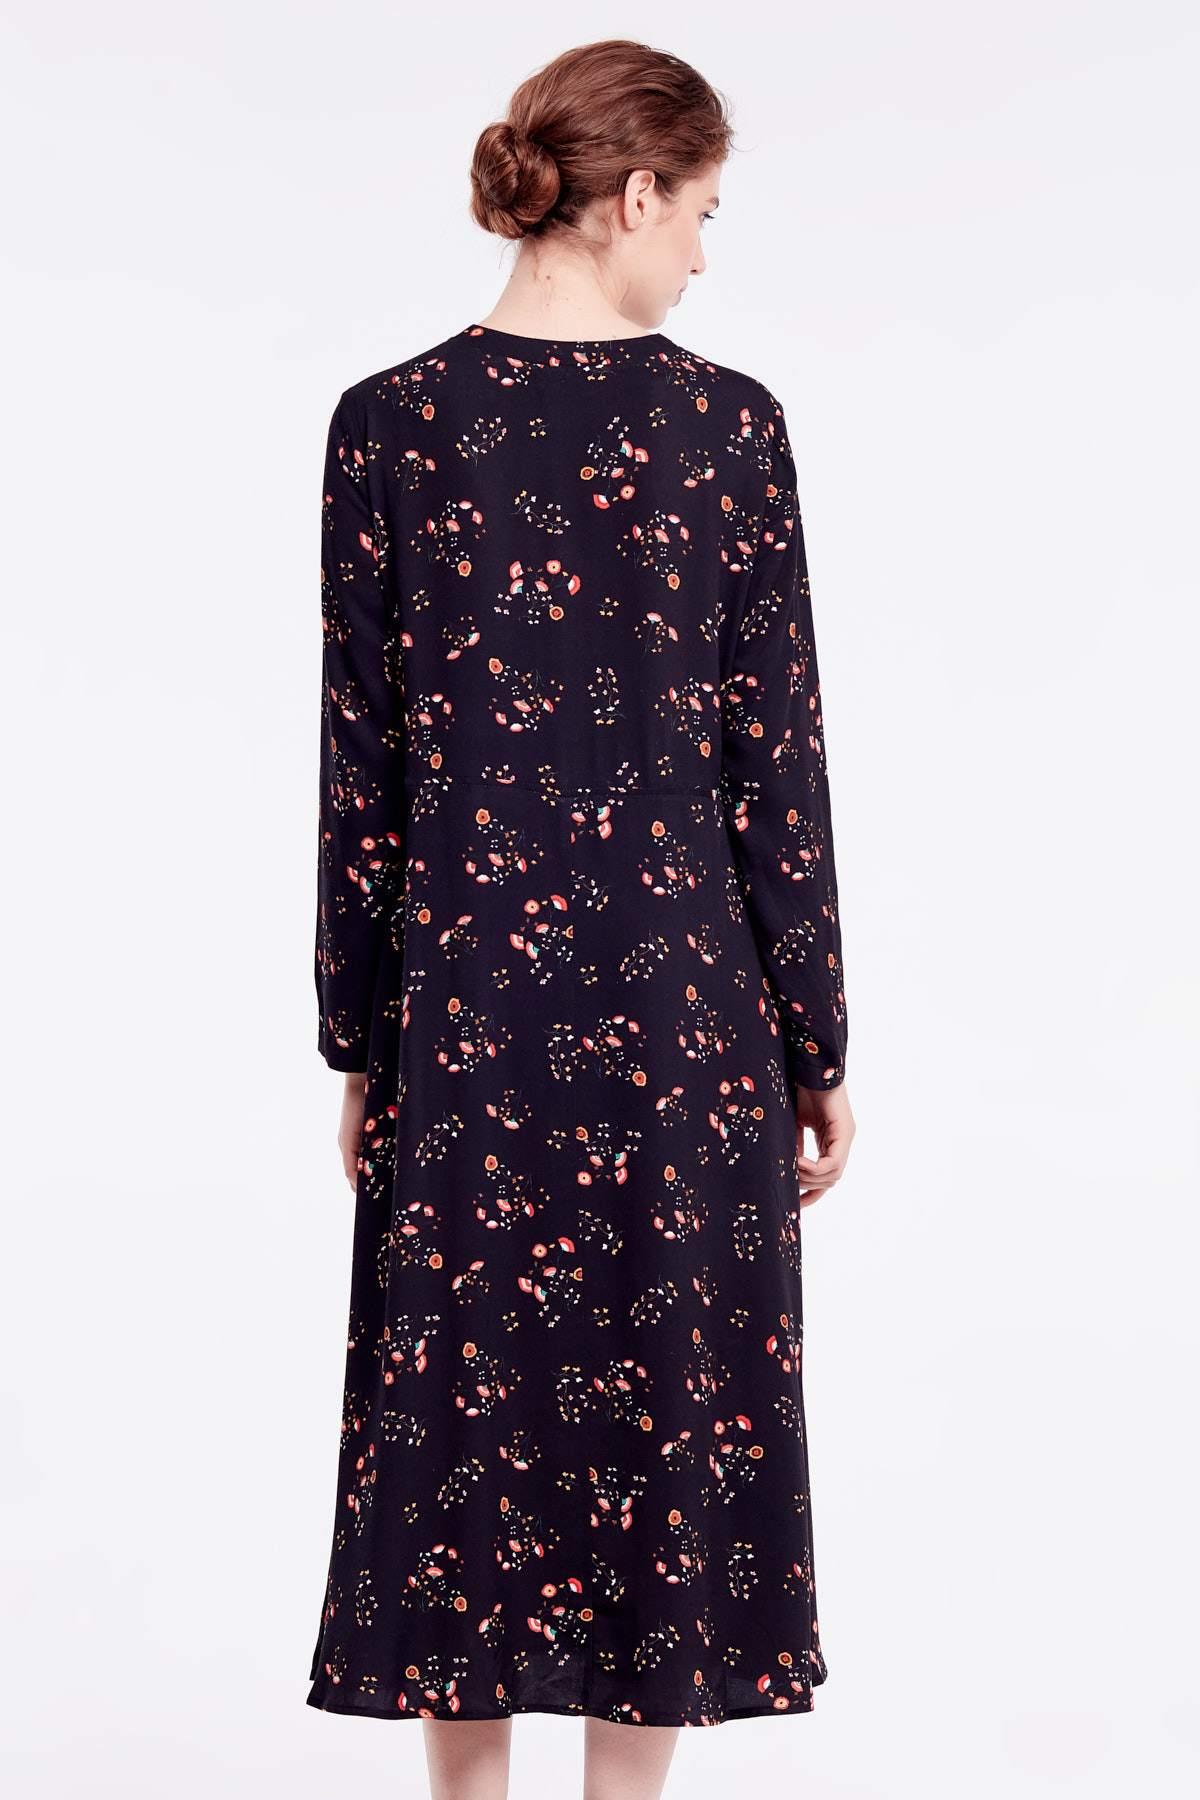 Midi black floral dress with a bow , photo 6